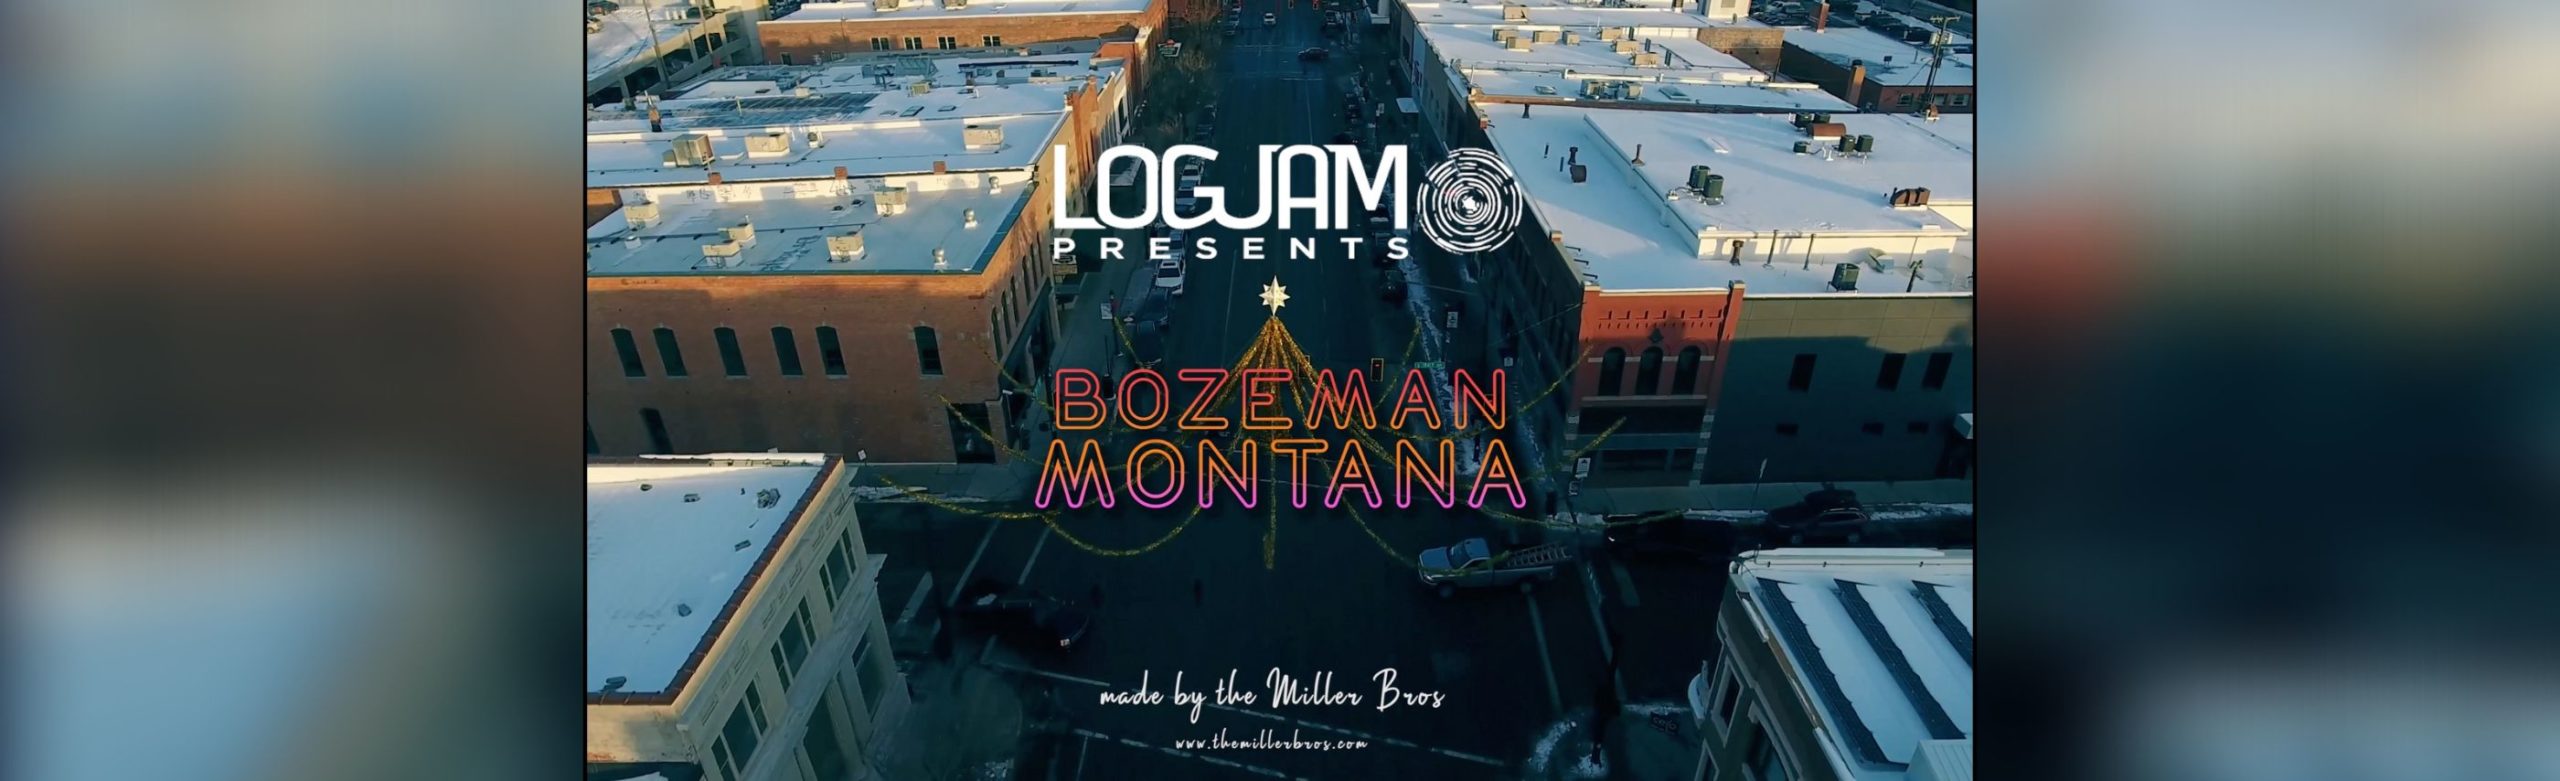 Local Videographers Team Up with Magic City Hippies for Bozeman Recap Video Image